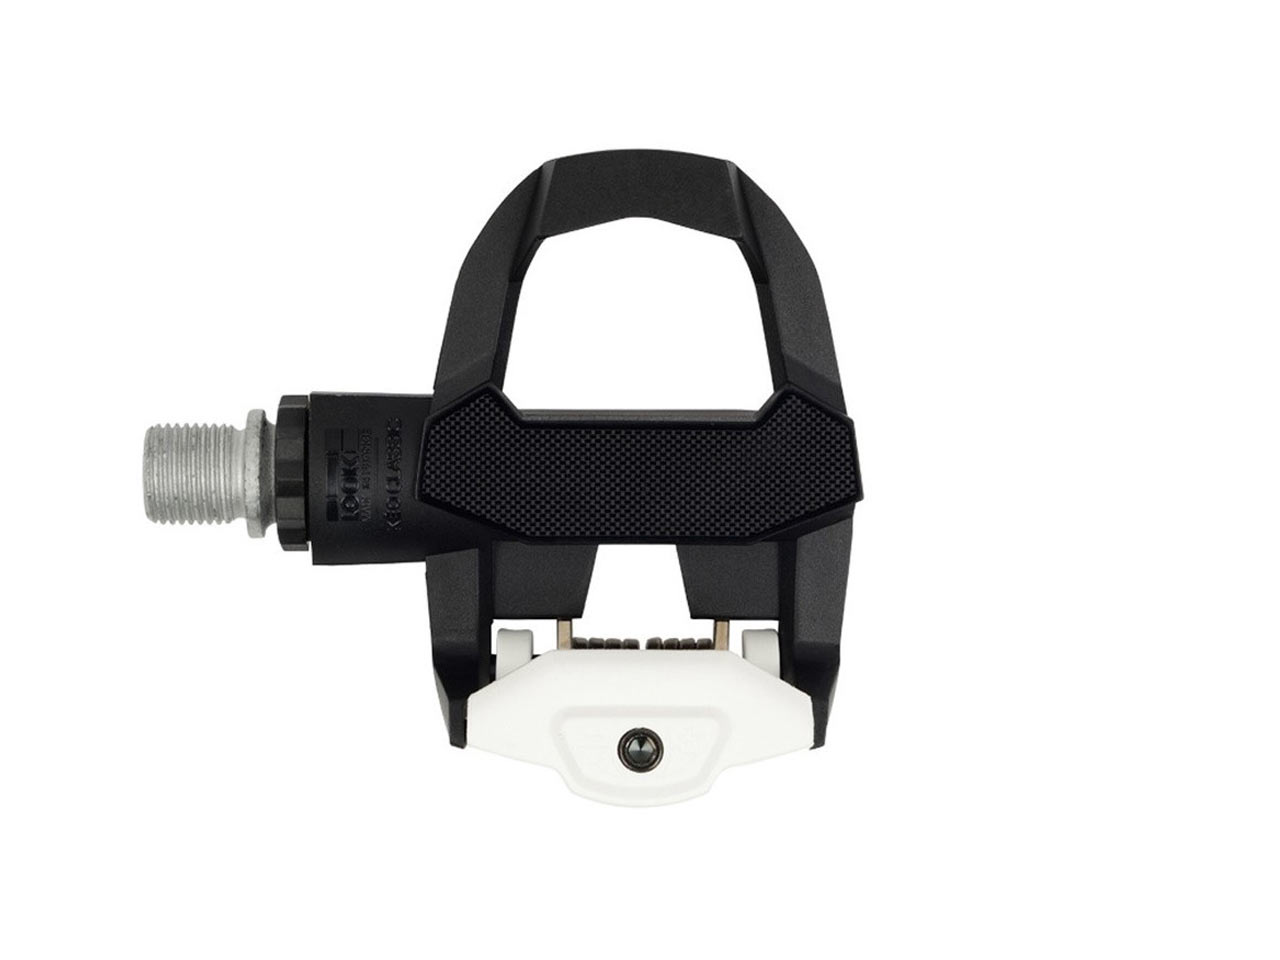 Look Keo Classic 3 Pedals - Black / White